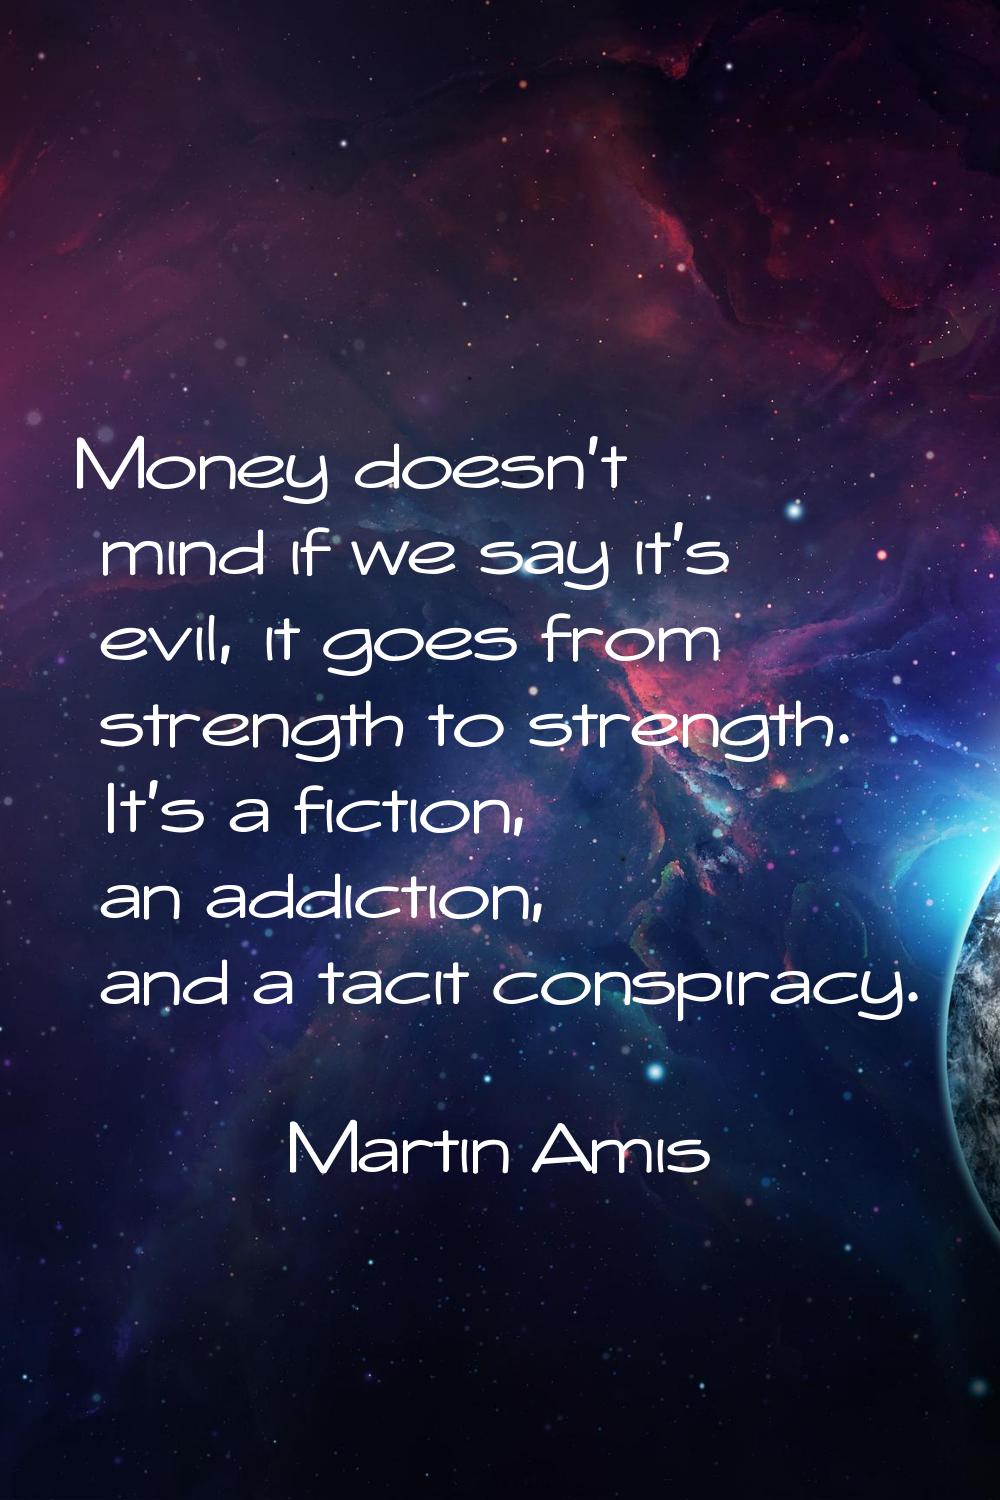 Money doesn't mind if we say it's evil, it goes from strength to strength. It's a fiction, an addic